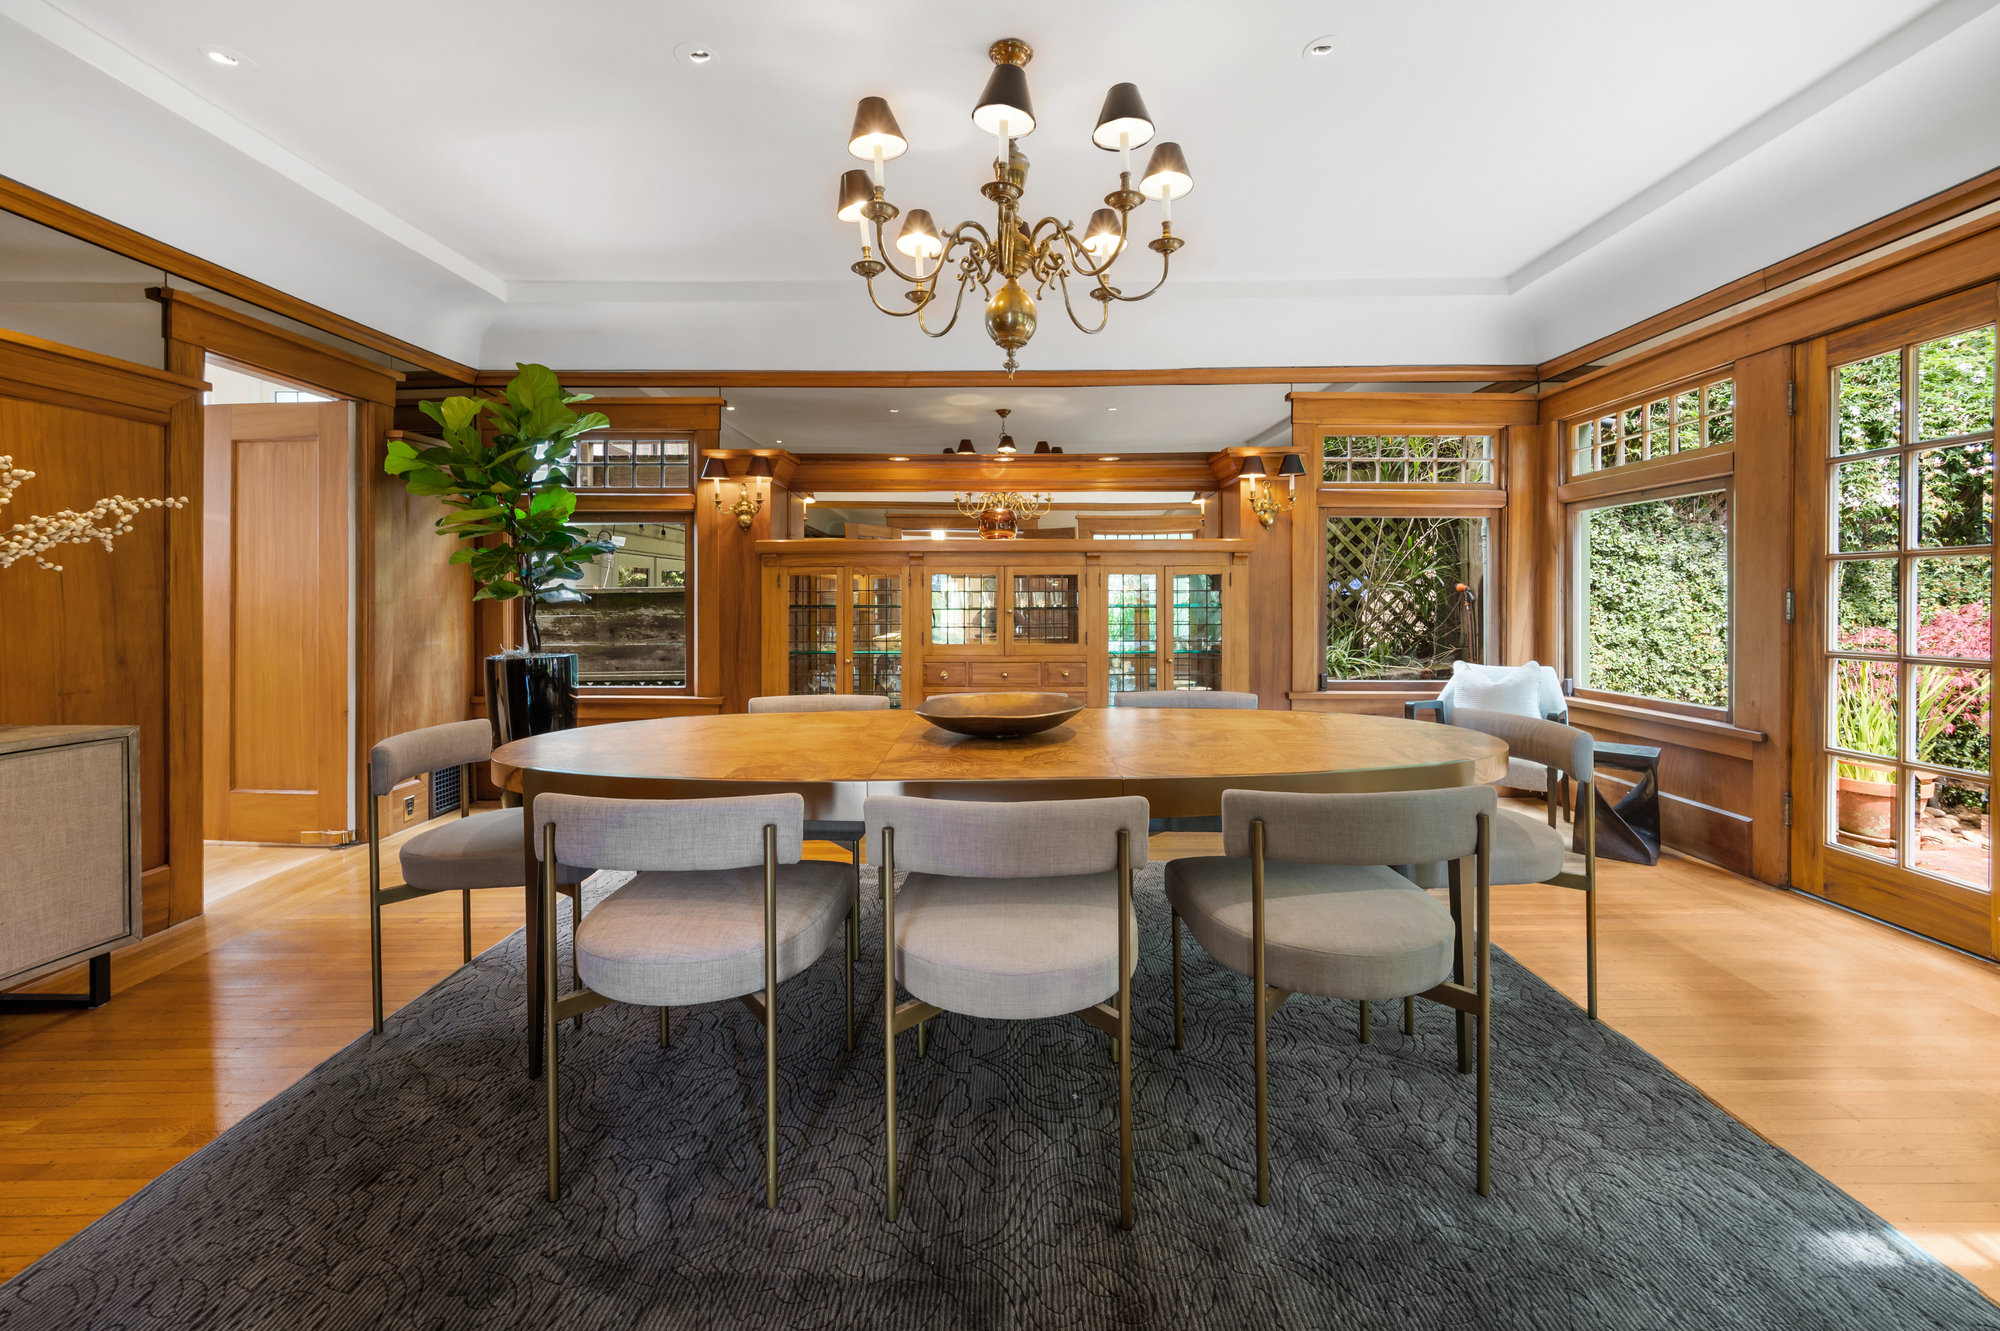 Property Photo: Formal dining room with wood framed doors and large windows